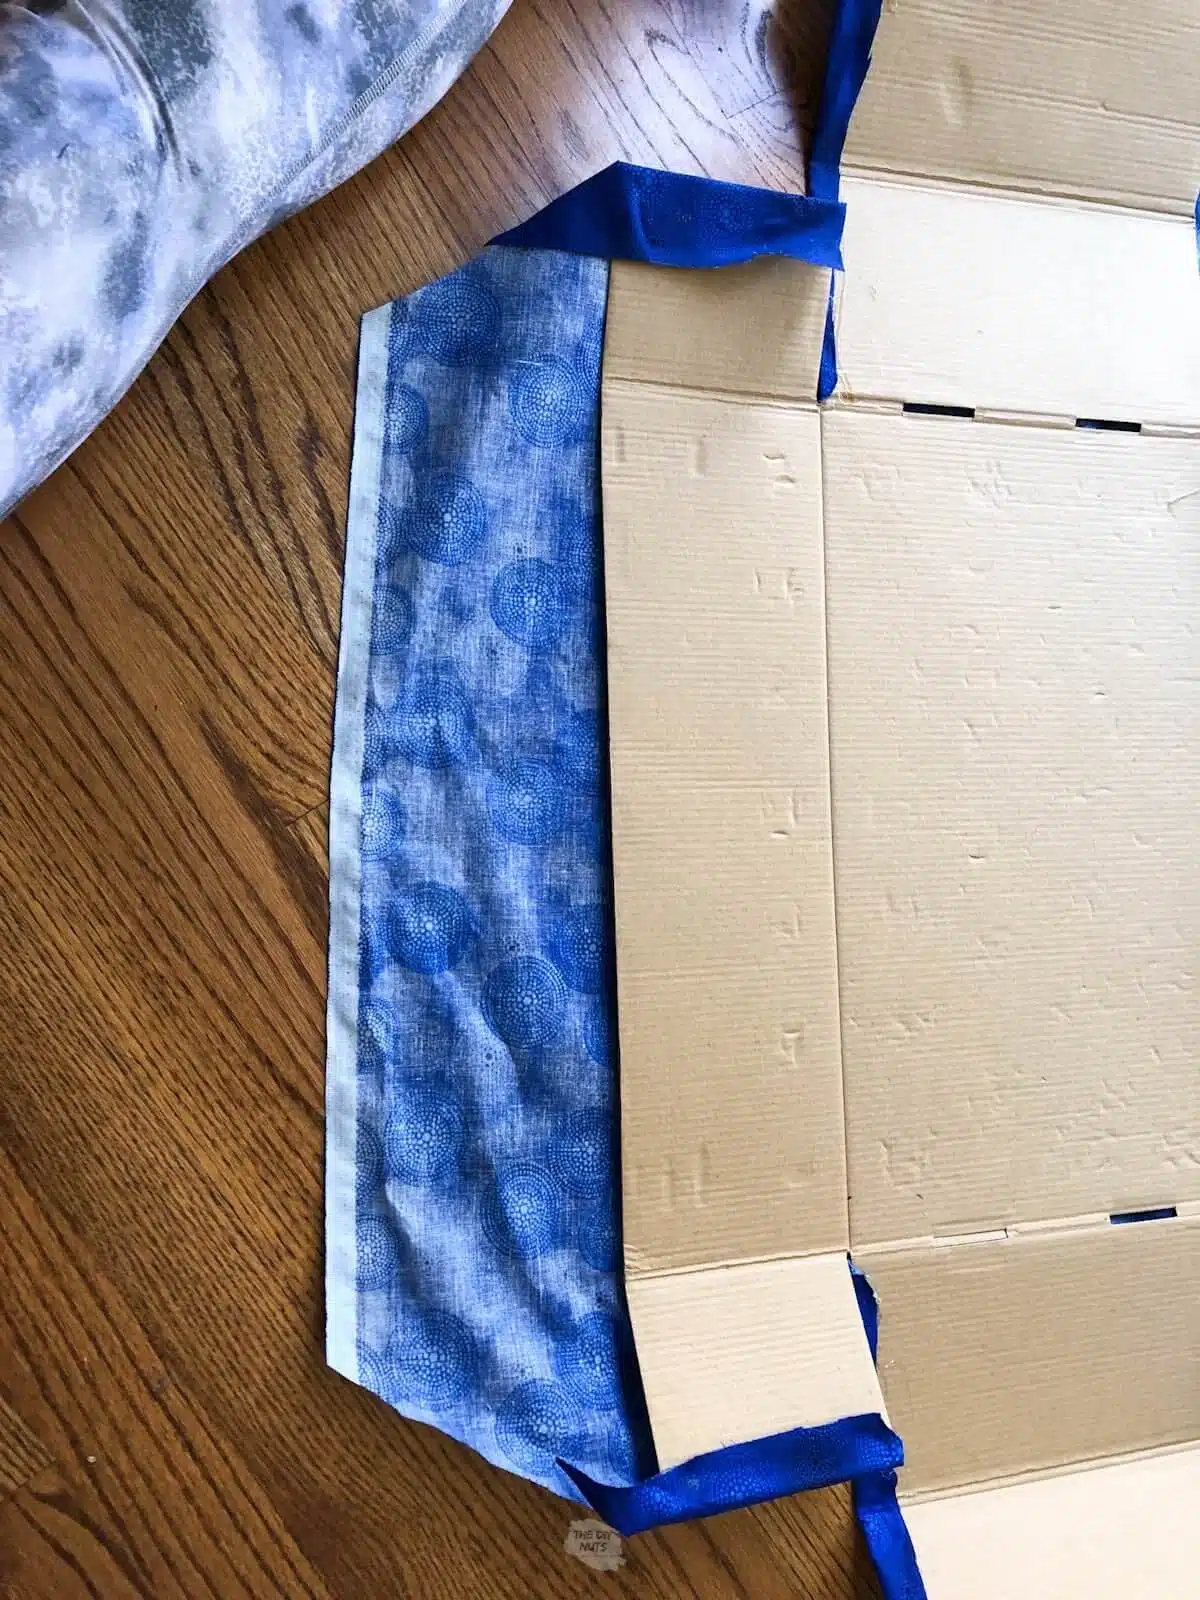 fabric being wrapped around edges of open cardboard box.